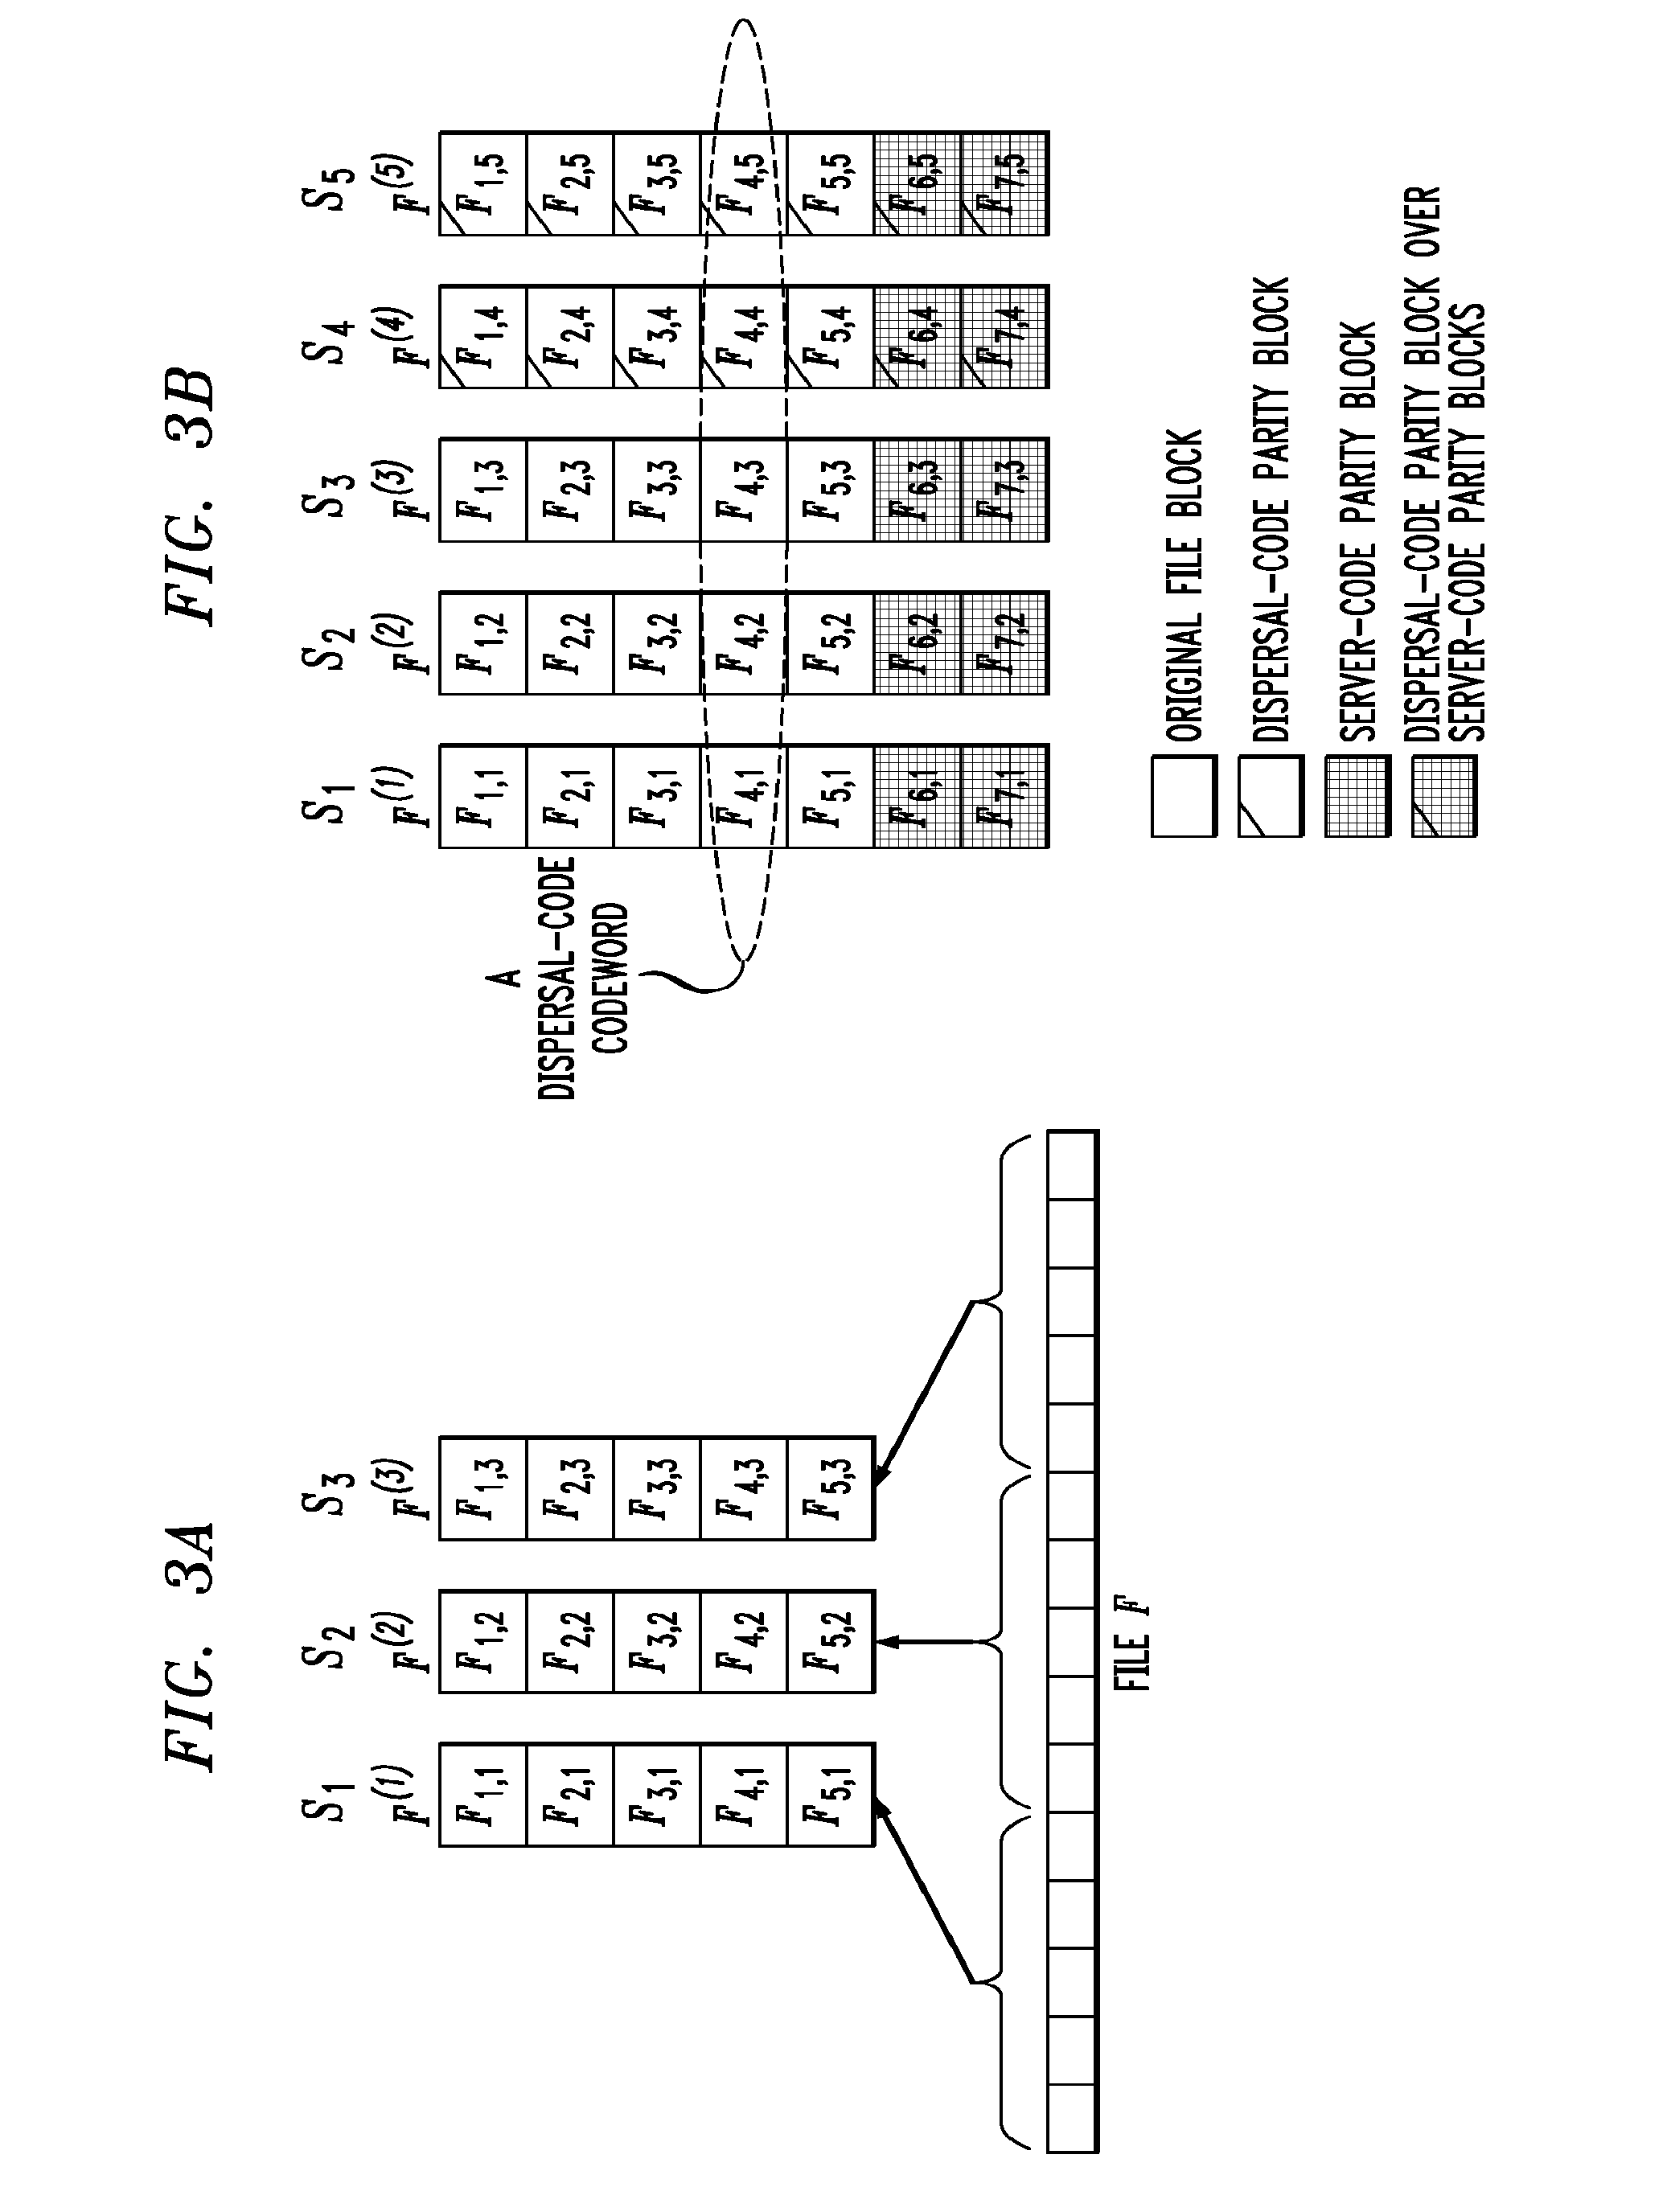 Distributed storage system with enhanced security